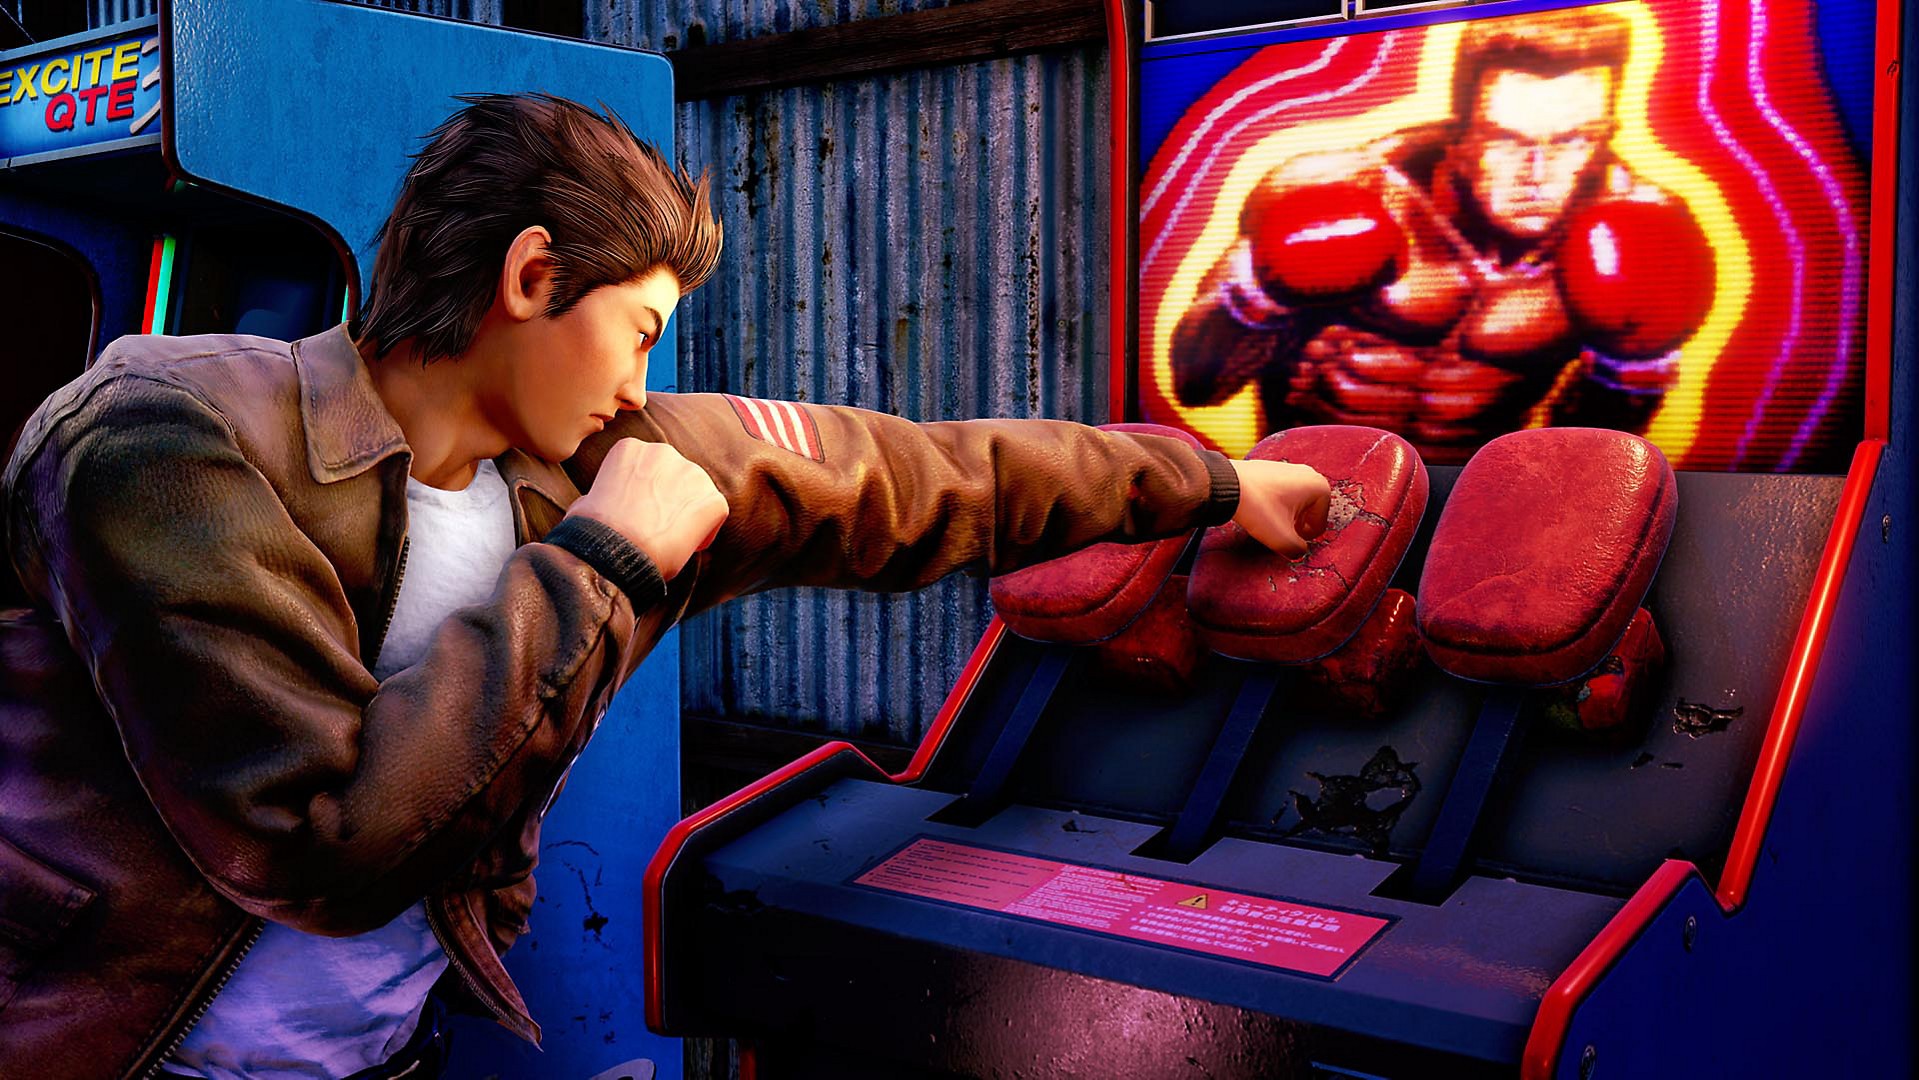 Action, Action & Adventure, adventure, Koch Media, Martial Arts, open world, PS4, PS4 Review, Shenmue, Shenmue III, Shenmue III Review, Story Rich, YS Net